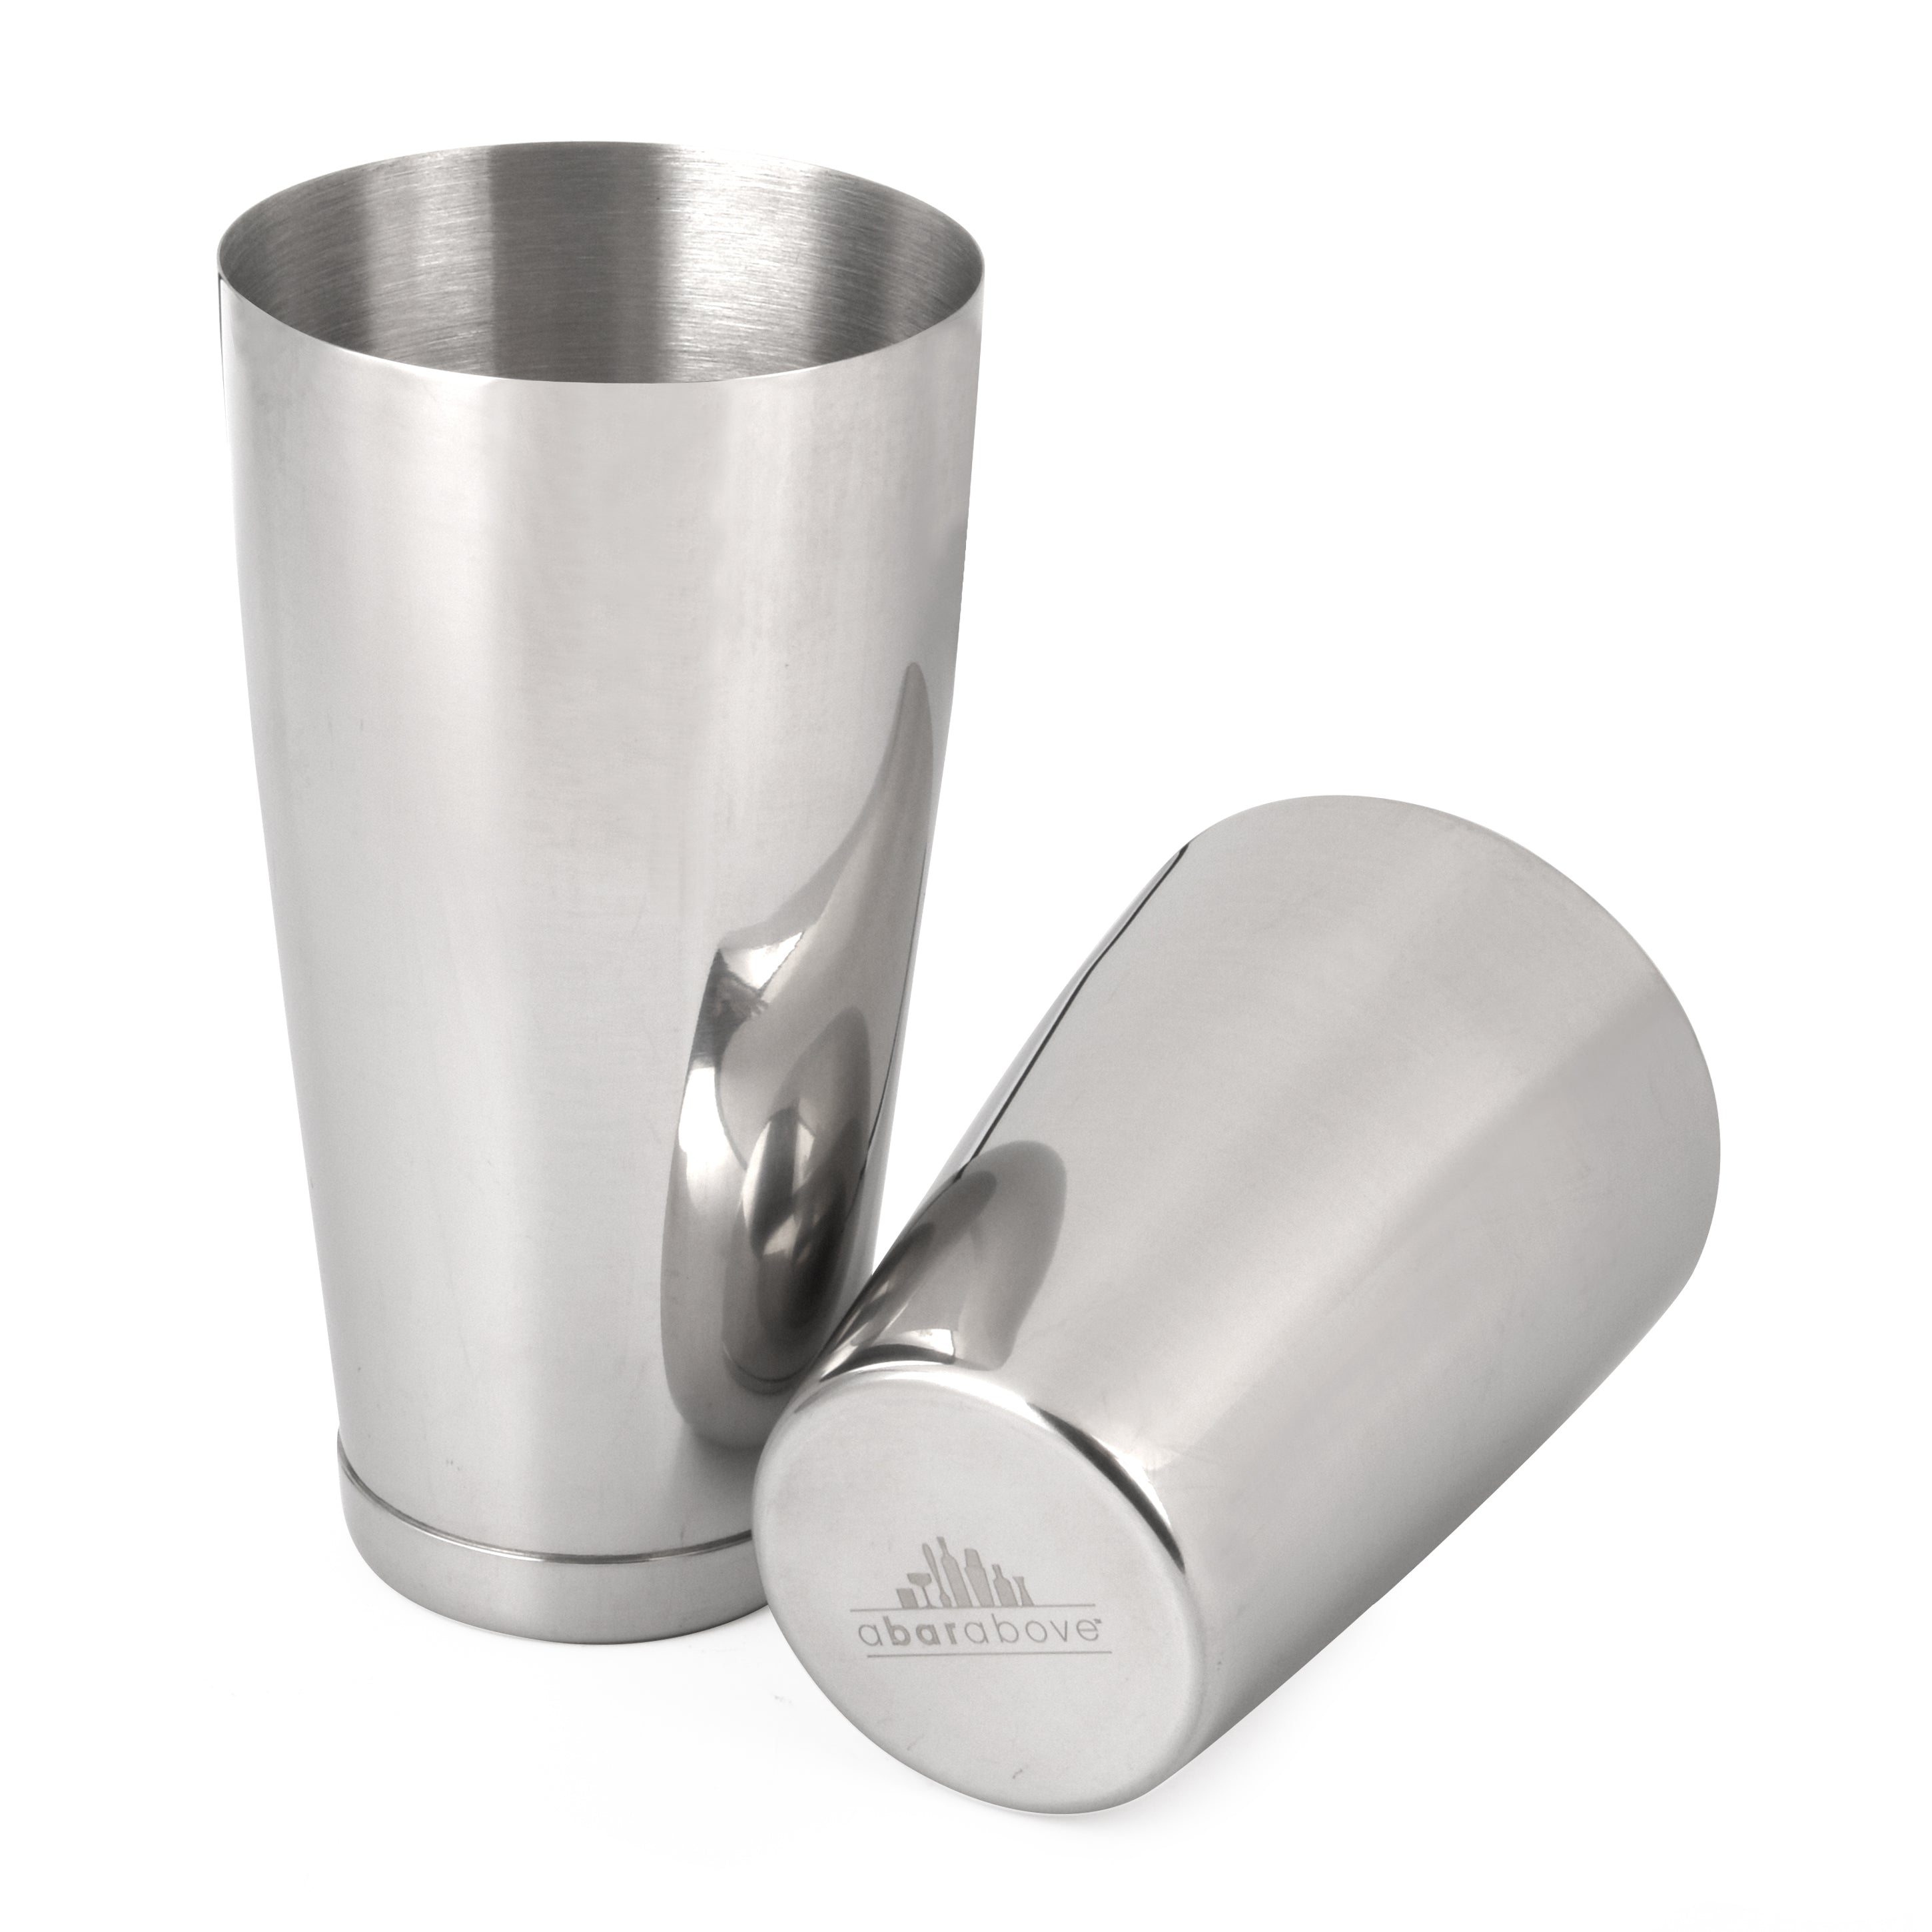 10 Best Cocktail Shakers 2022- Top Cobbler And Boston Shaker Designs